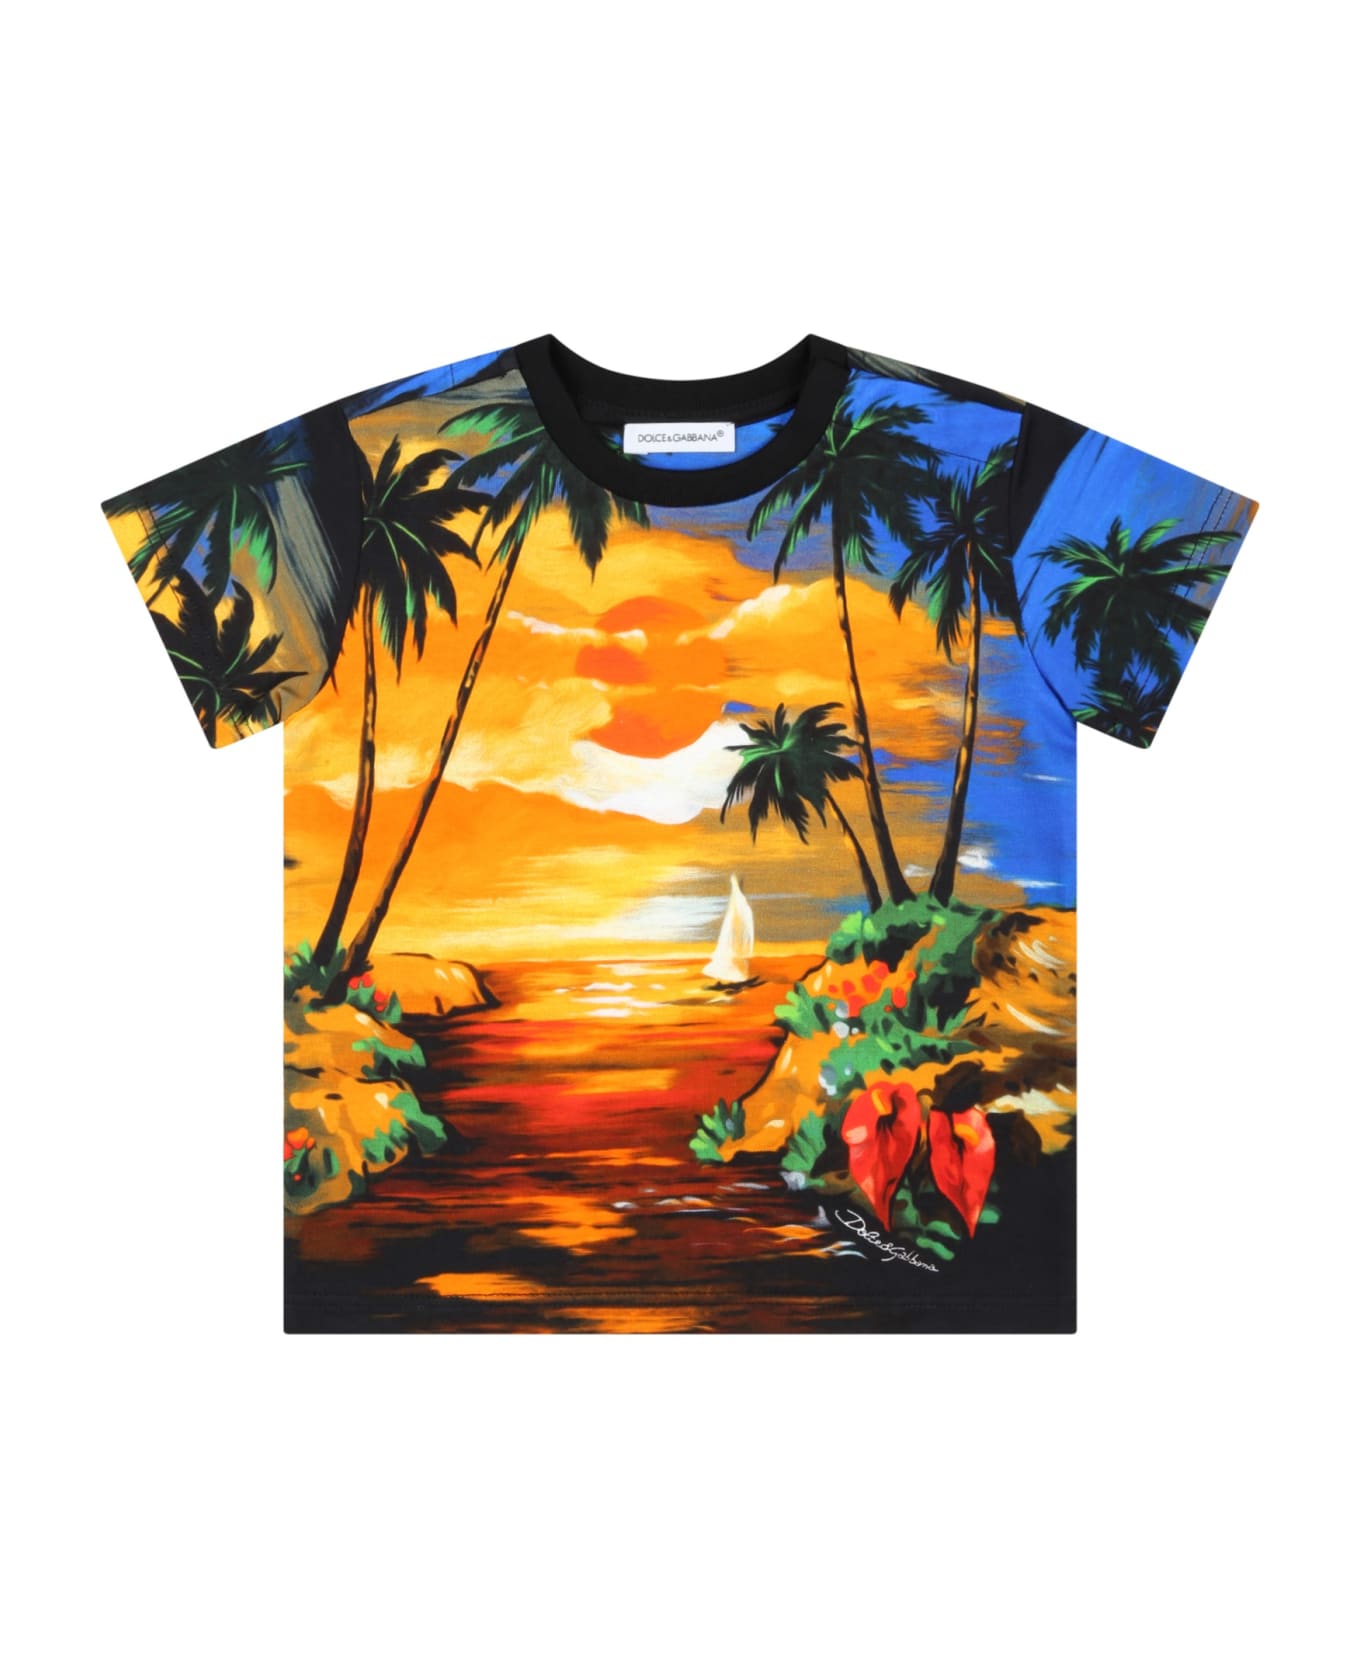 Dolce & Gabbana Multicolor T-shirt For Baby Boy With Sunset - Multicolor